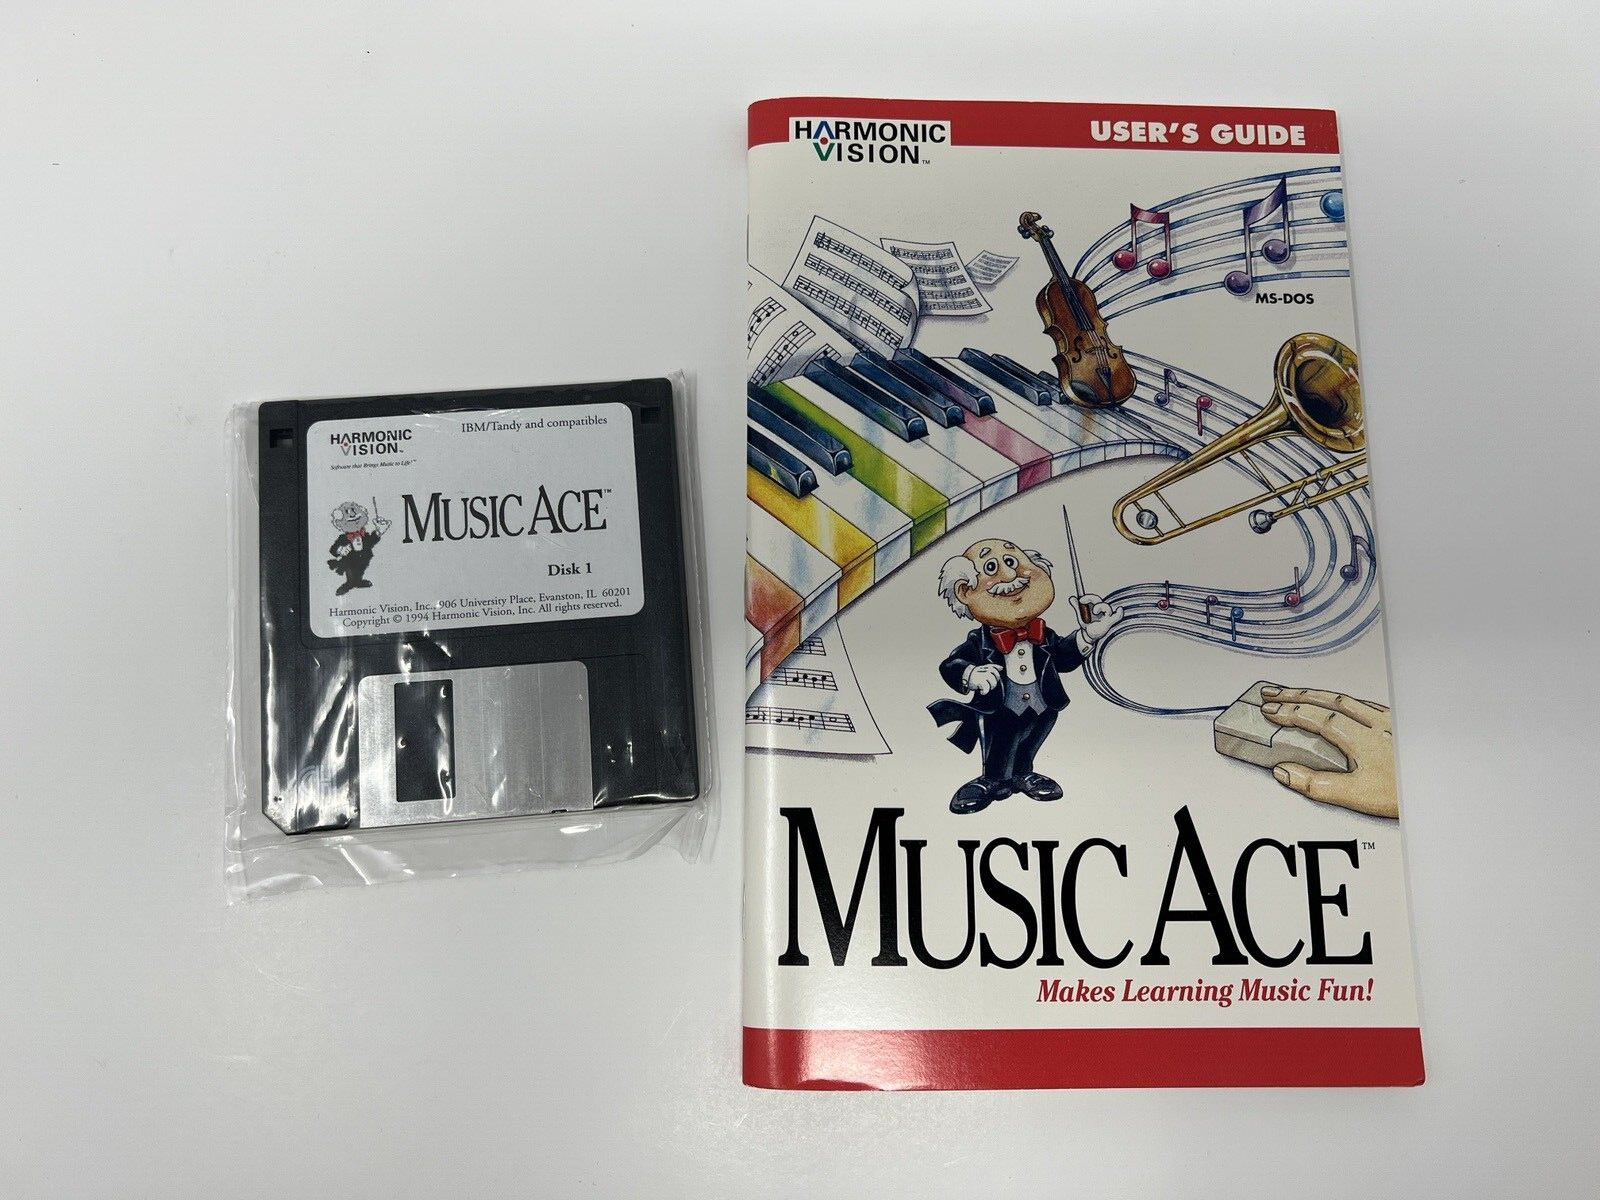 Harmonic Vision Music Ace MS-DOS IBM/Tandy Compatibles Vintage 1994 New Floppy